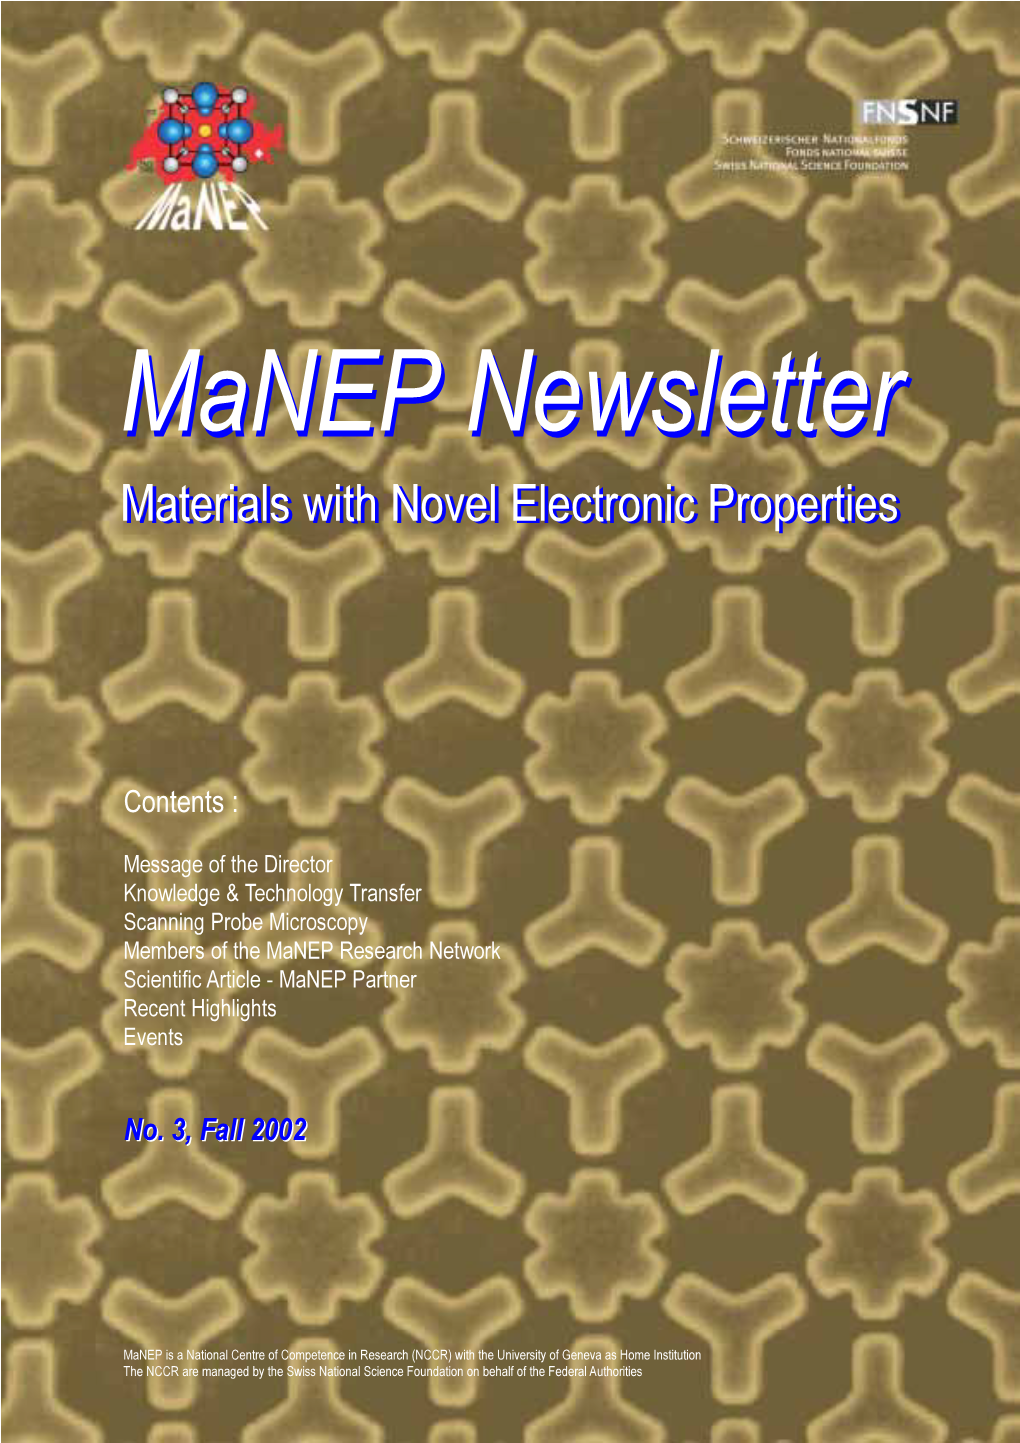 Manep Newsletternewsletter Materialsmaterials Withwith Novelnovel Electronicelectronic Propertiesproperties